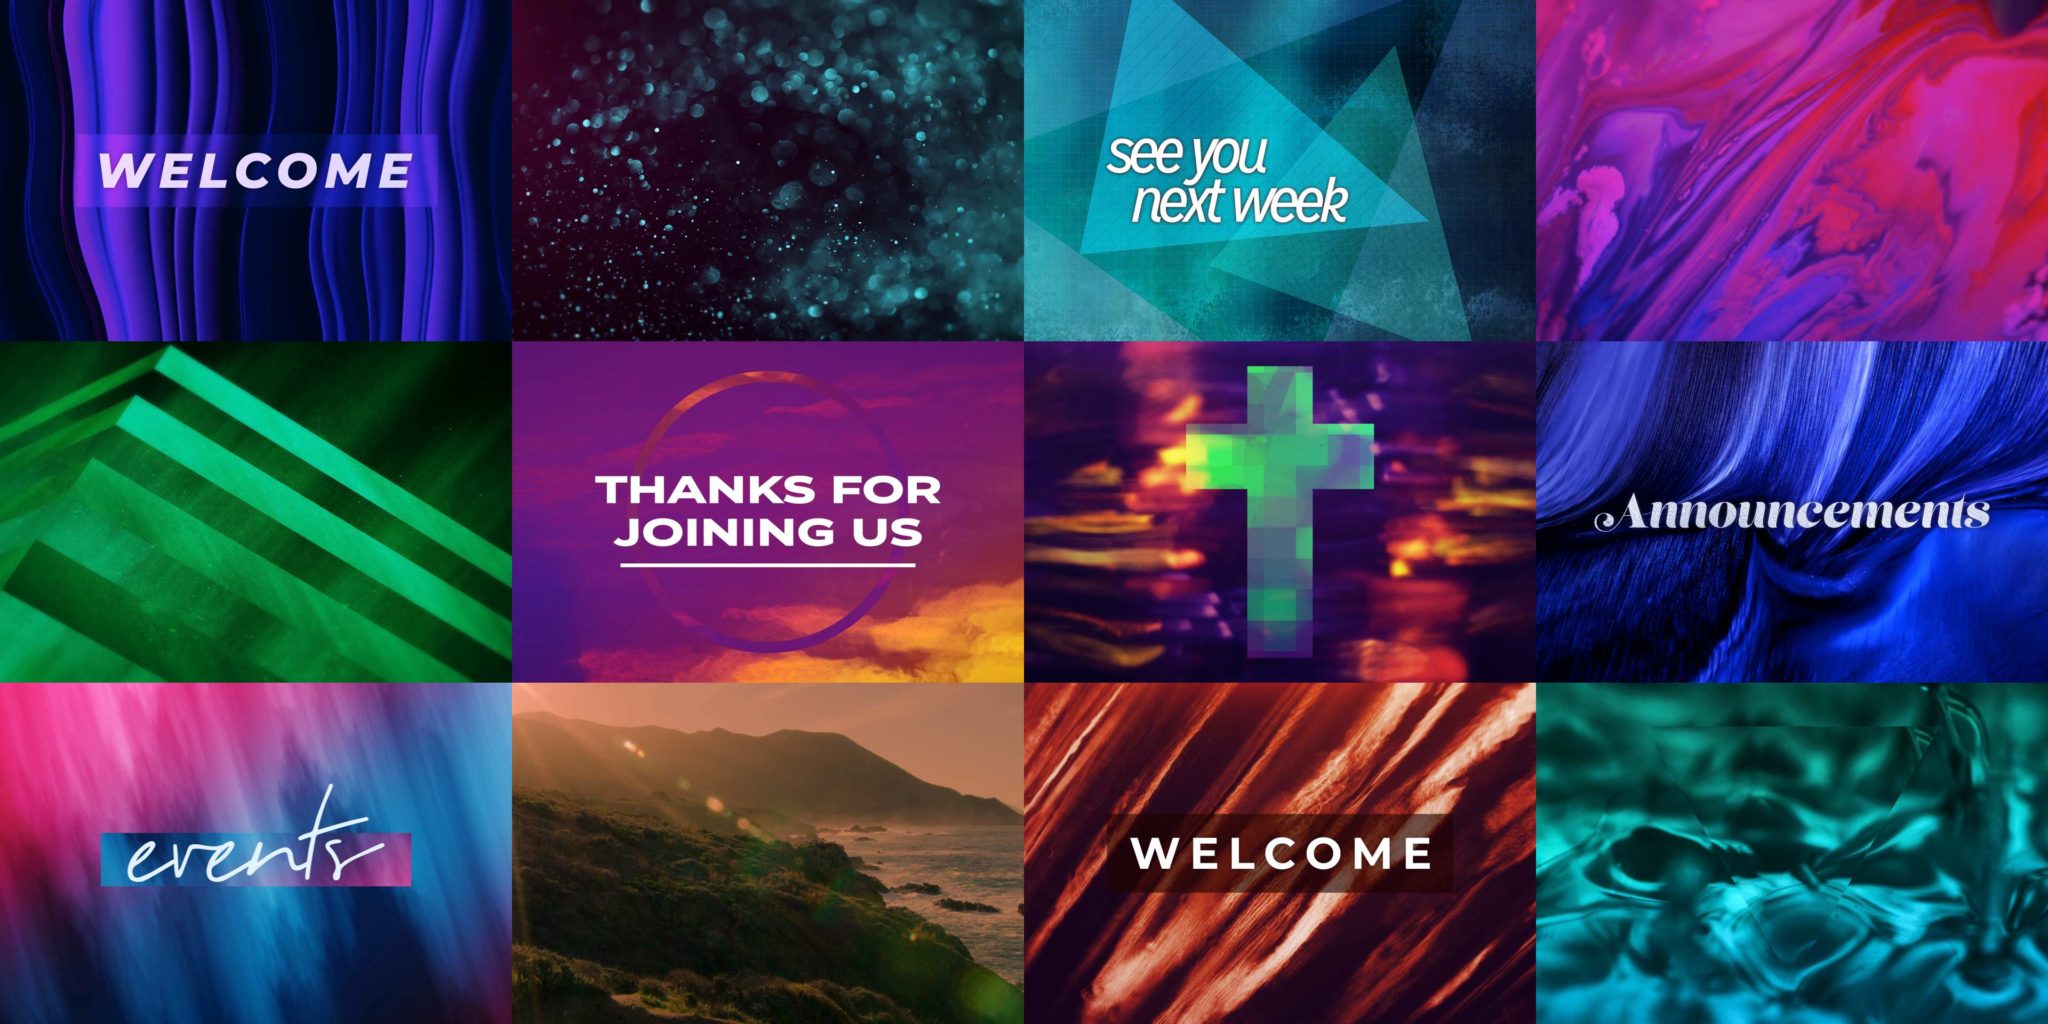 free church backgrounds for propresenter